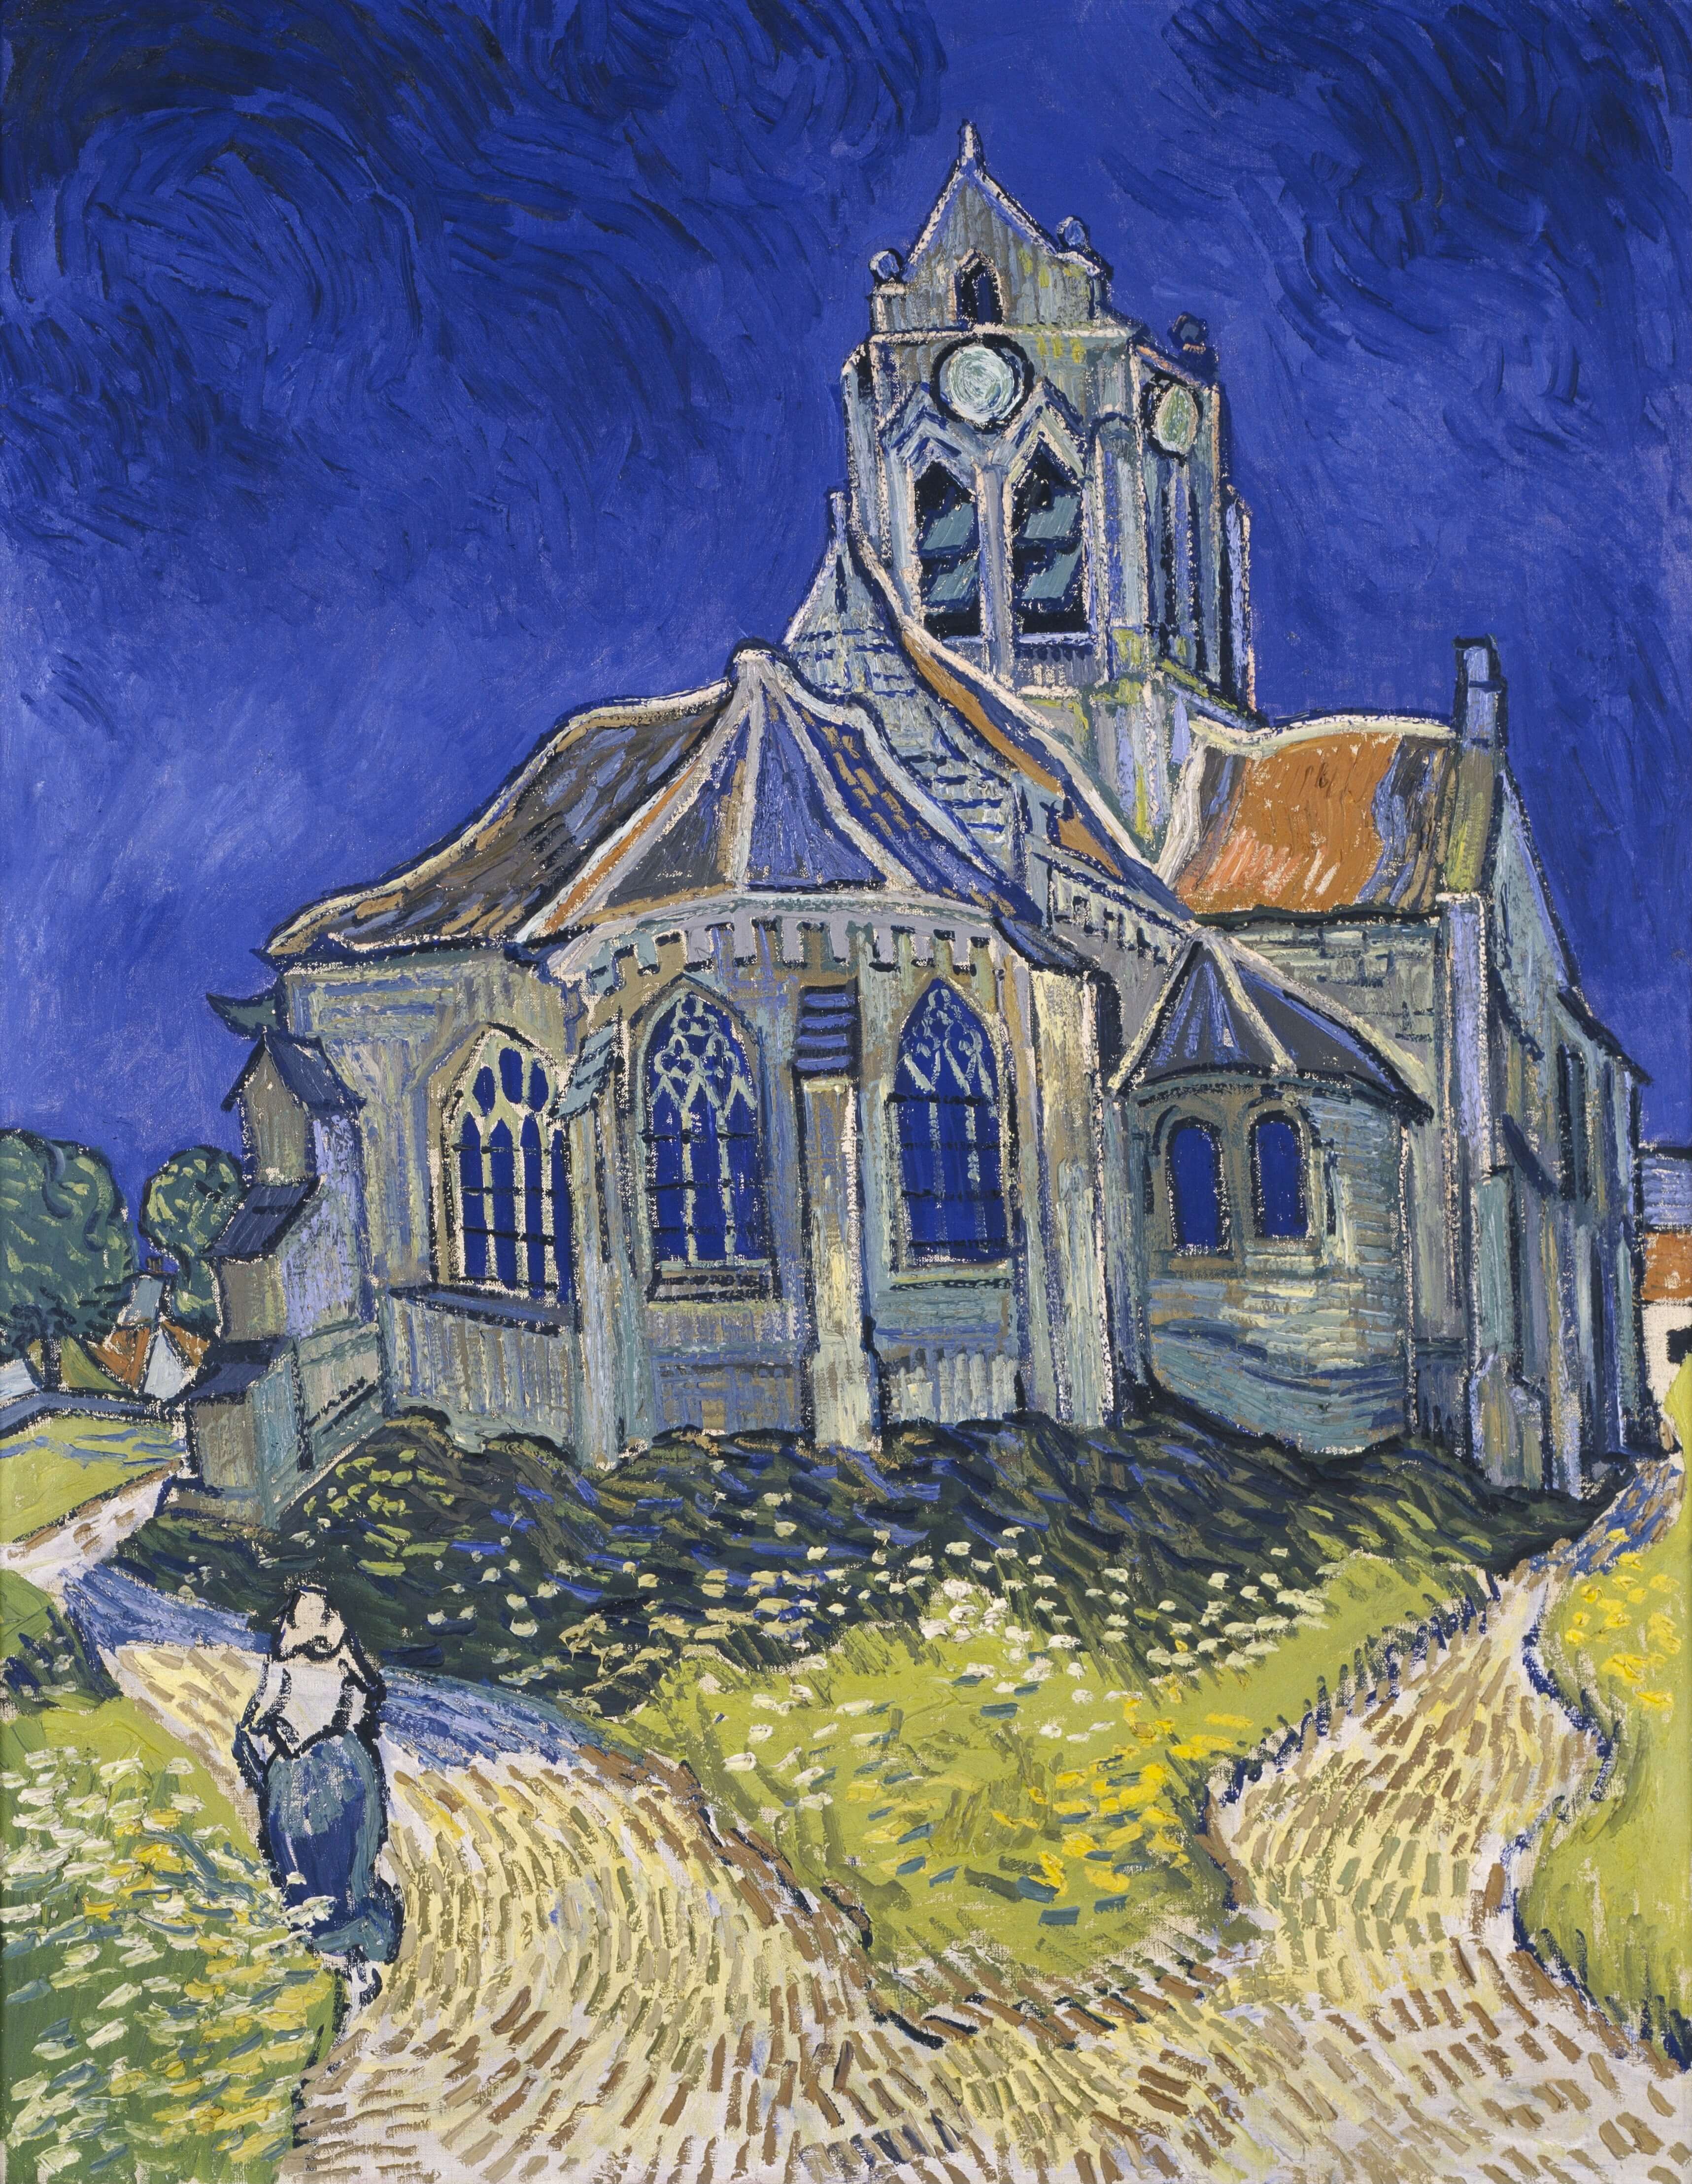 Vincent_van_Gogh_-_The_Church_in_Auvers-sur-Oise_View_from_the_Chevet_-_Google_Art_Project